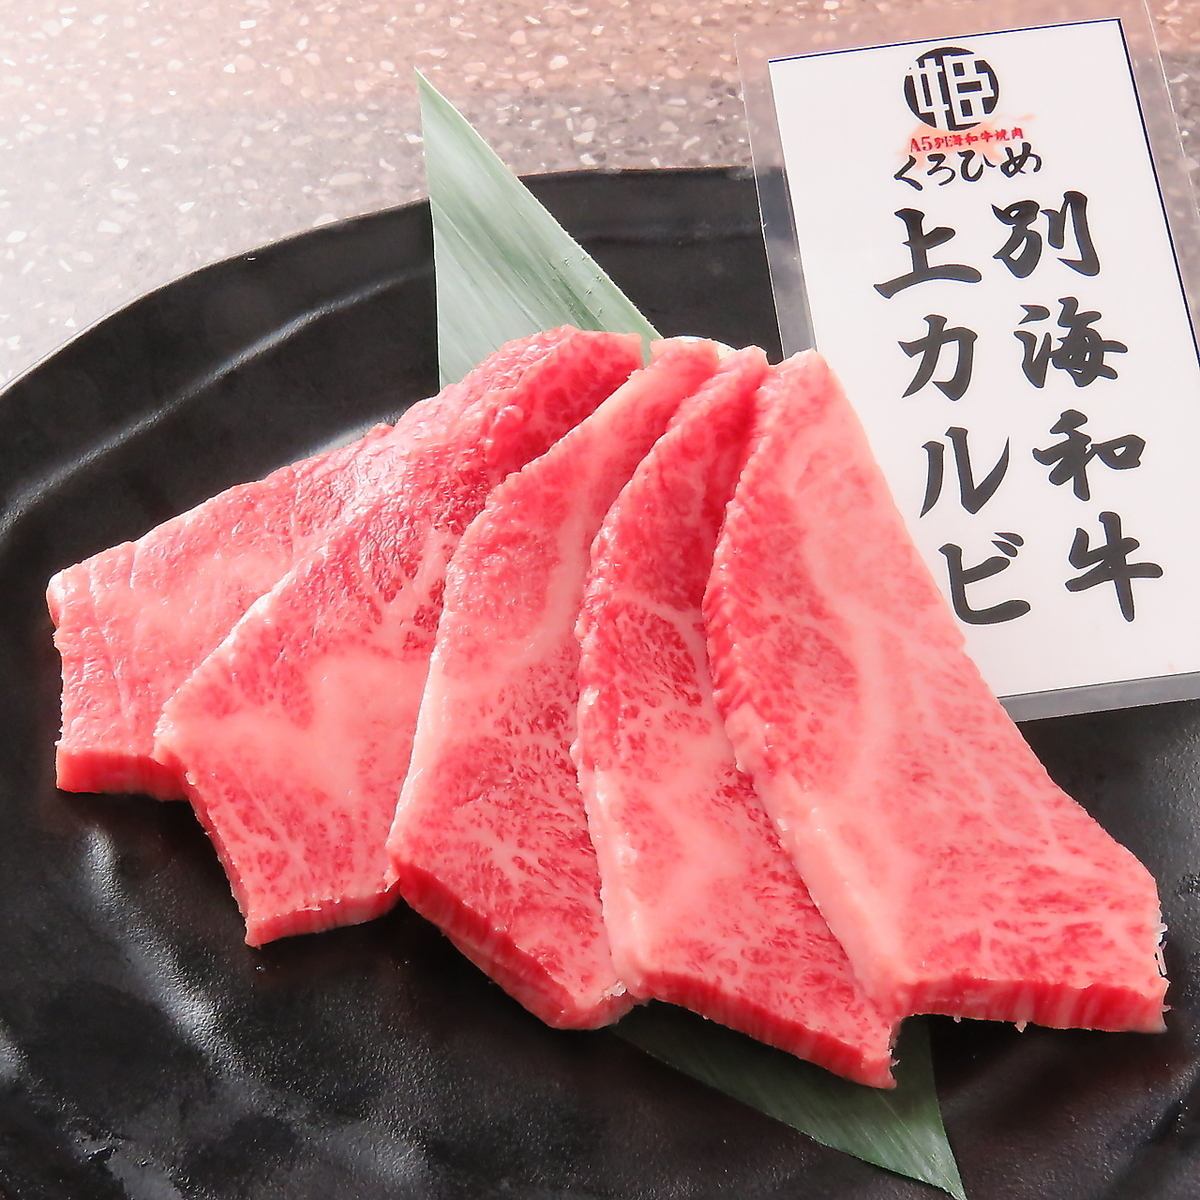 We offer high-quality meat!◎Tonight, the whole family will enjoy yakiniku♪